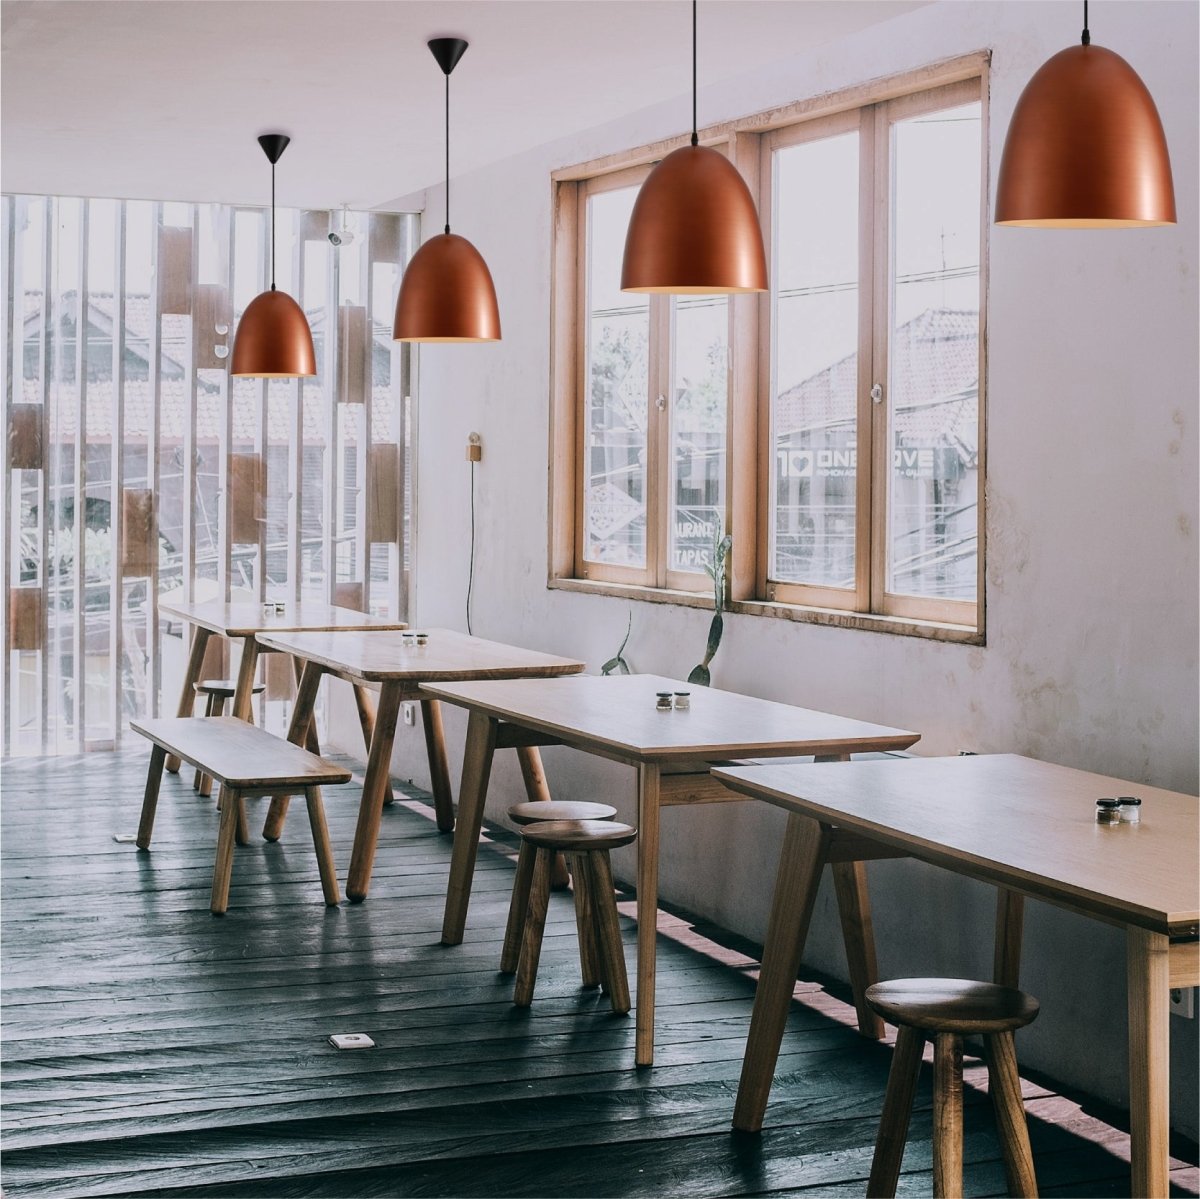 Indoor cafeteria cafe restaurant usage of Antique Copper Dome Metal Pendant Ceiling Light with E27 Fitting D220 | TEKLED 150-18189